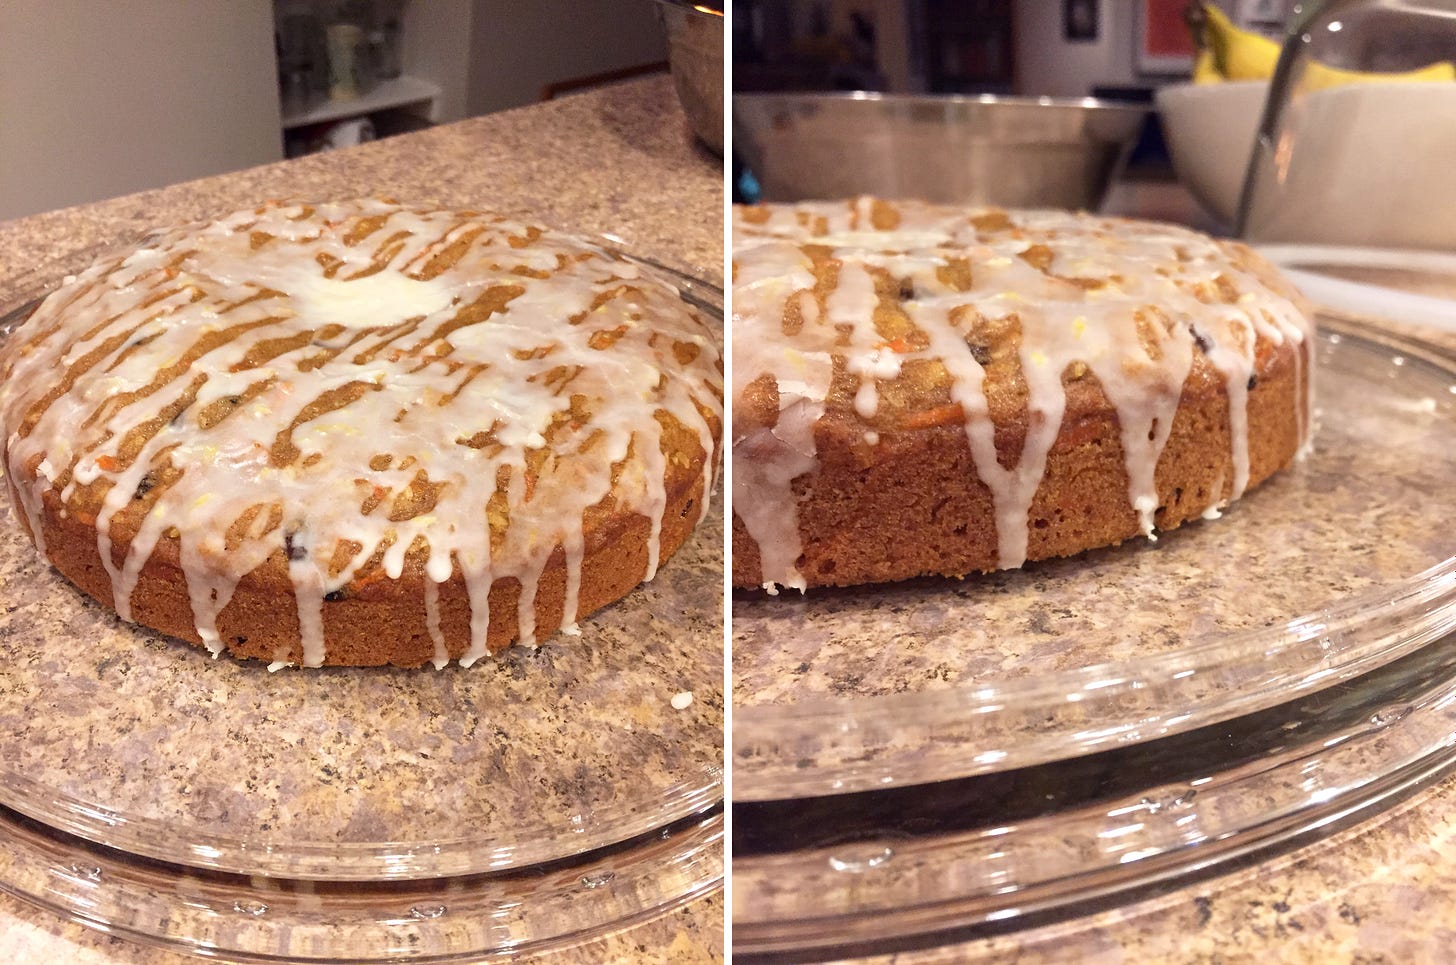 Left image: on a glass cake plate, a round carrot cake with sizeable drizzles of royal icing. Right image: a close up of the edge of the same cake. The icing has drizzled down the sides.